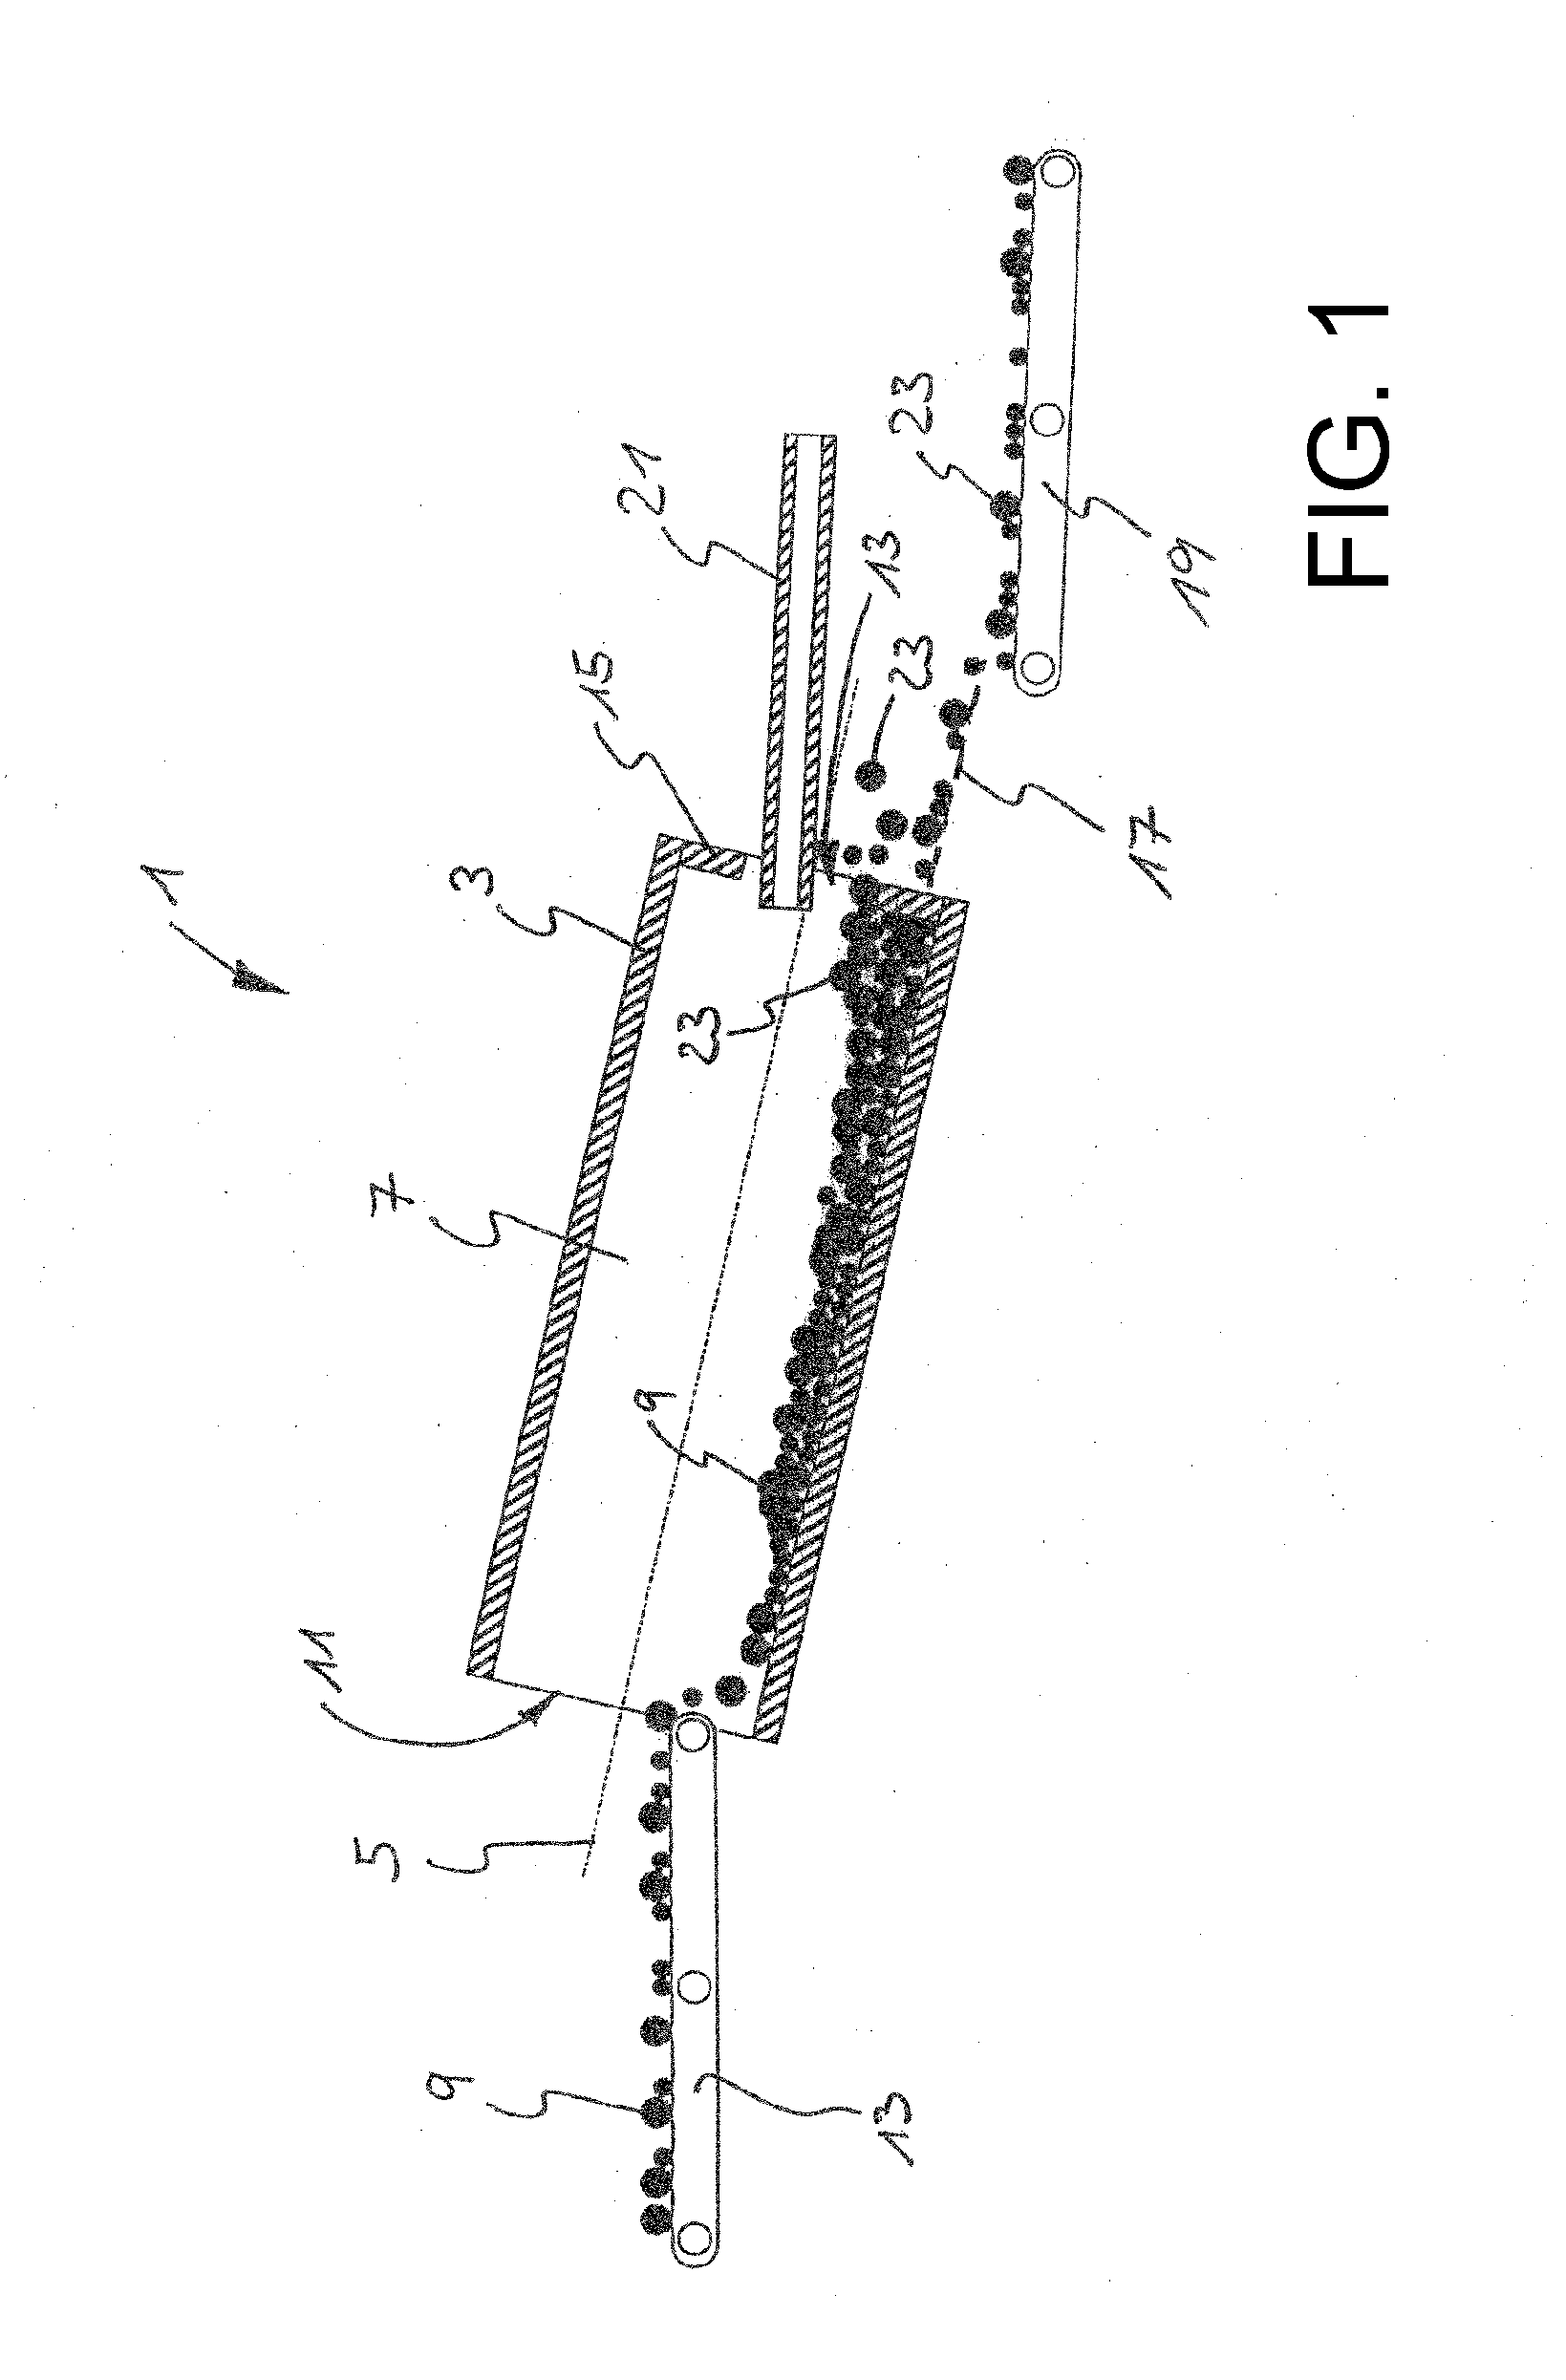 Method for producing aggregate and calcium carbonate from concrete composite materials, and a device for carrying out said method